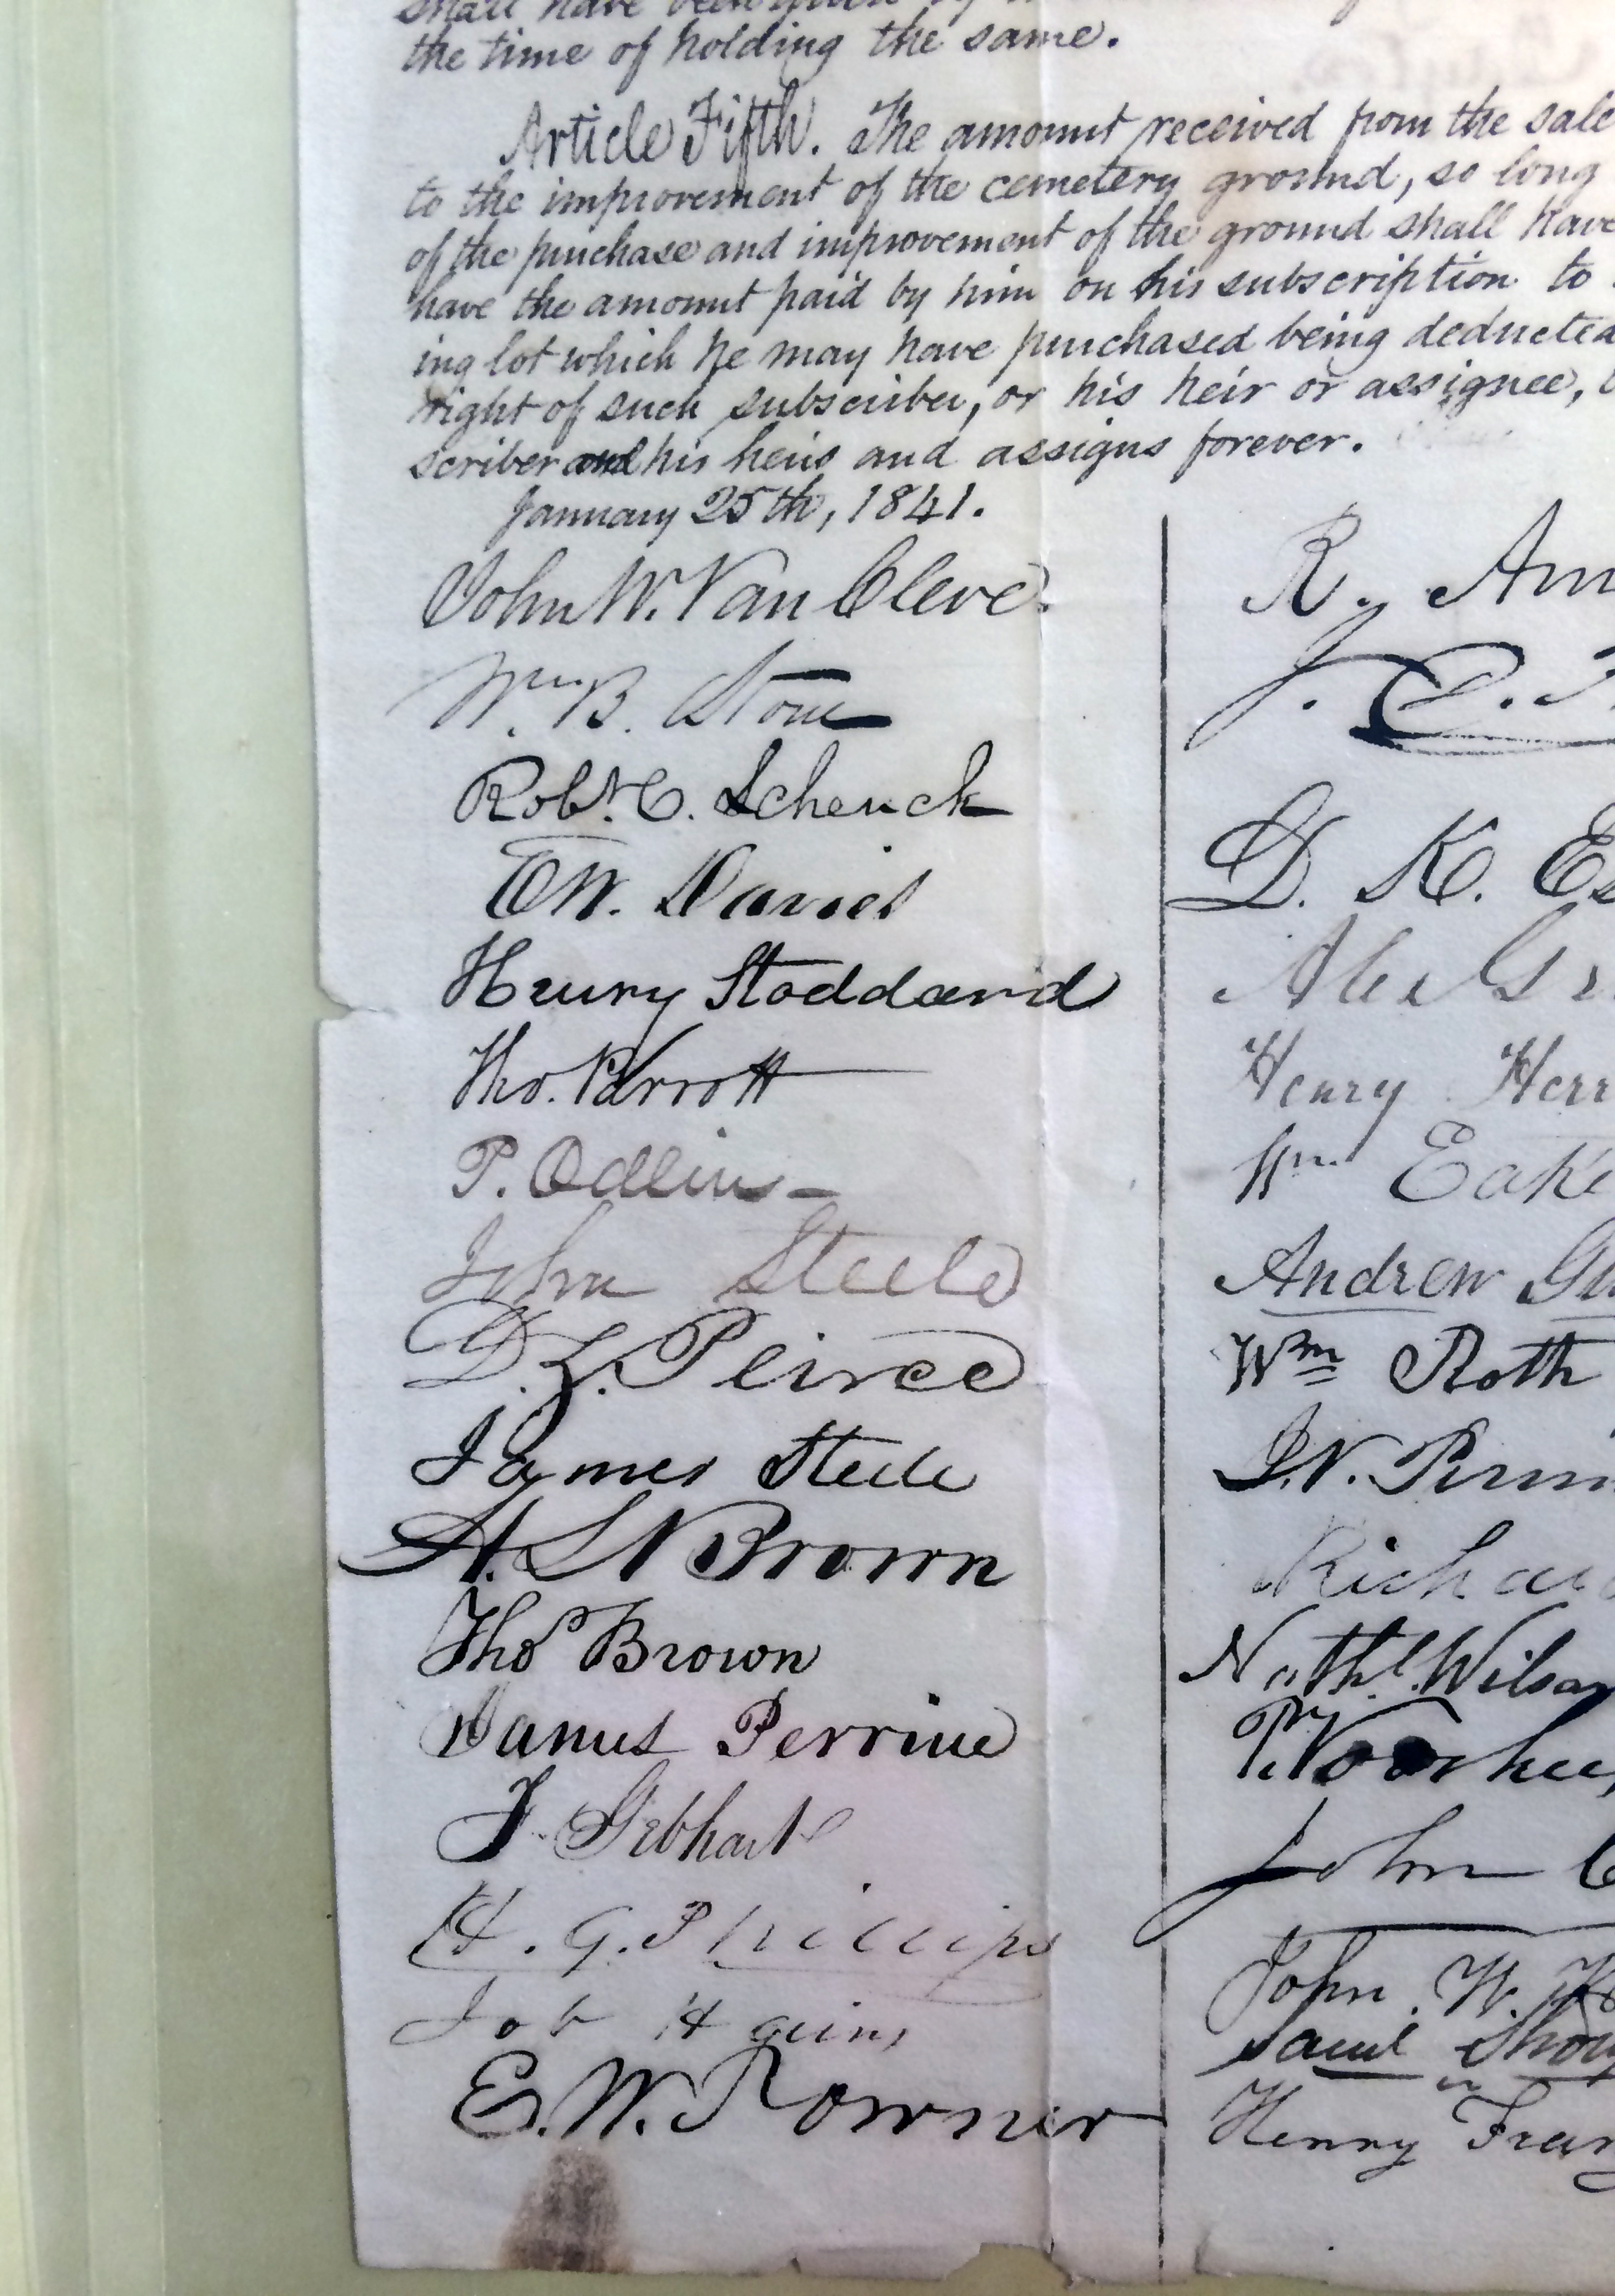 Detail of Woodland Cemetery Articles of Association, showing date, as well as Van Cleve's and other signatures